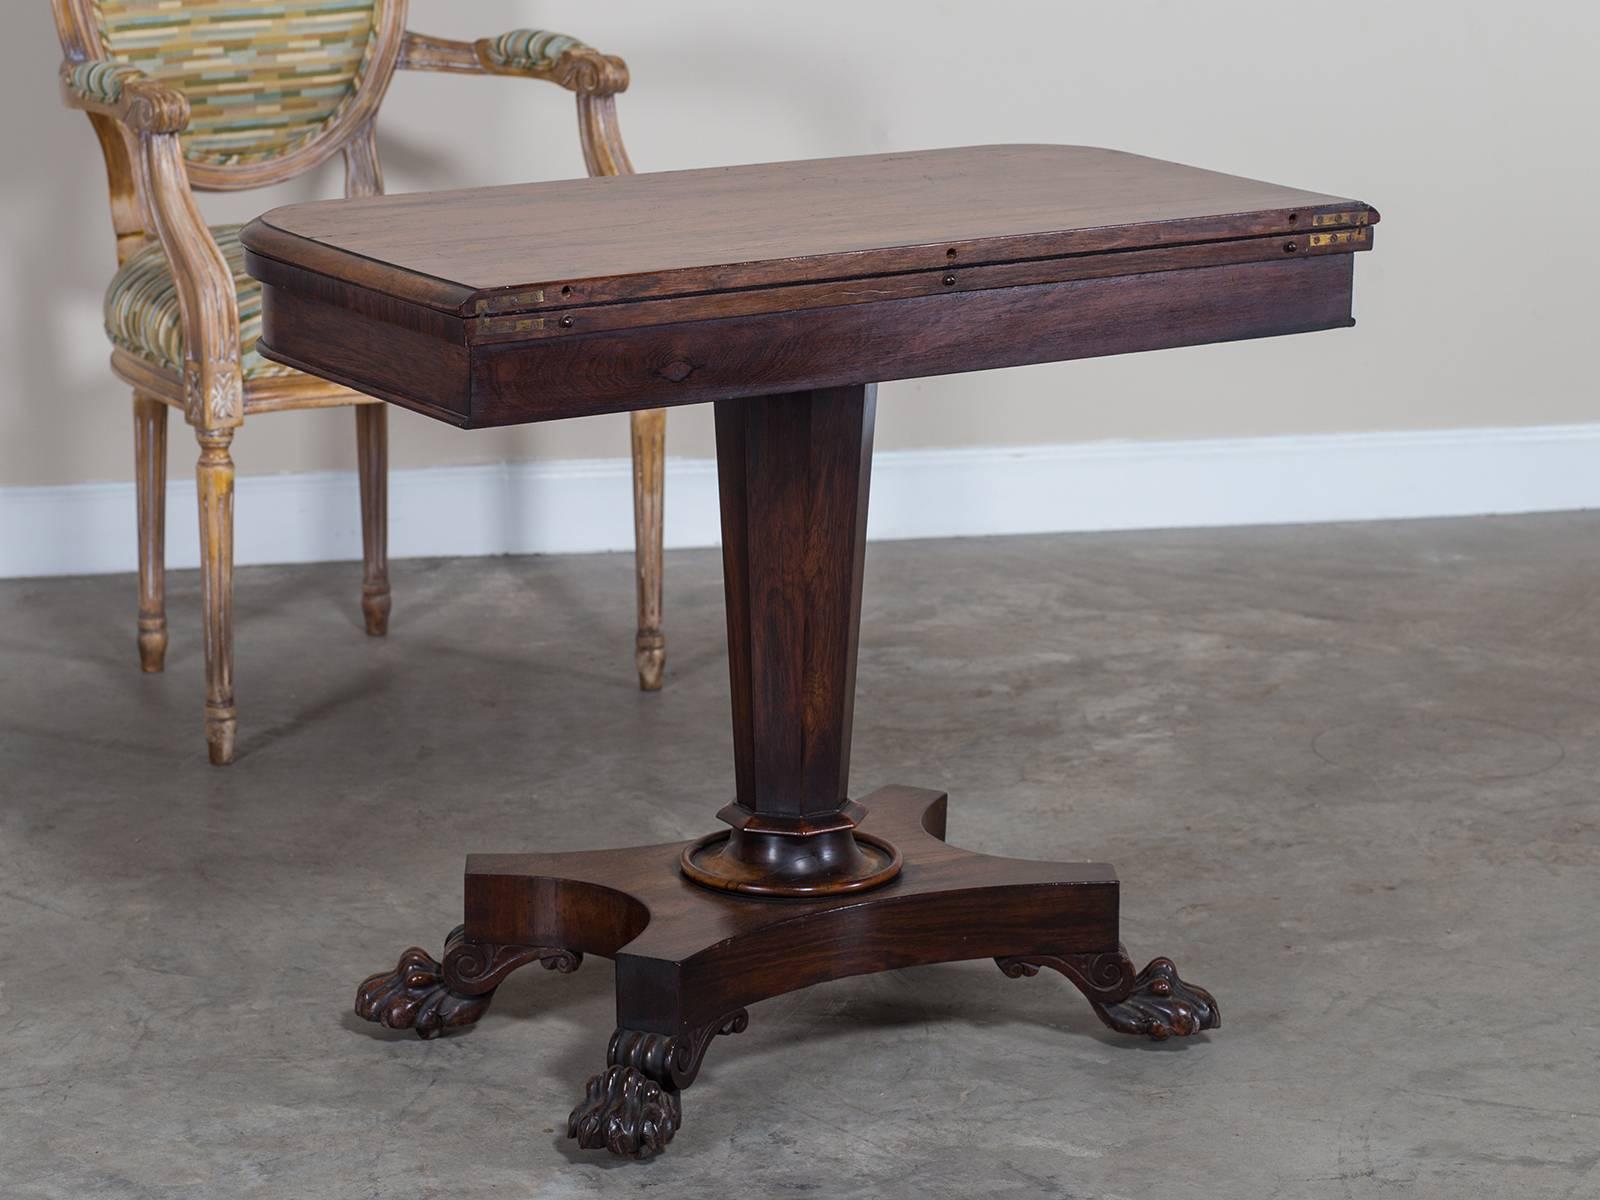 Mid-19th Century Antique English Rosewood Game Table, circa 1840